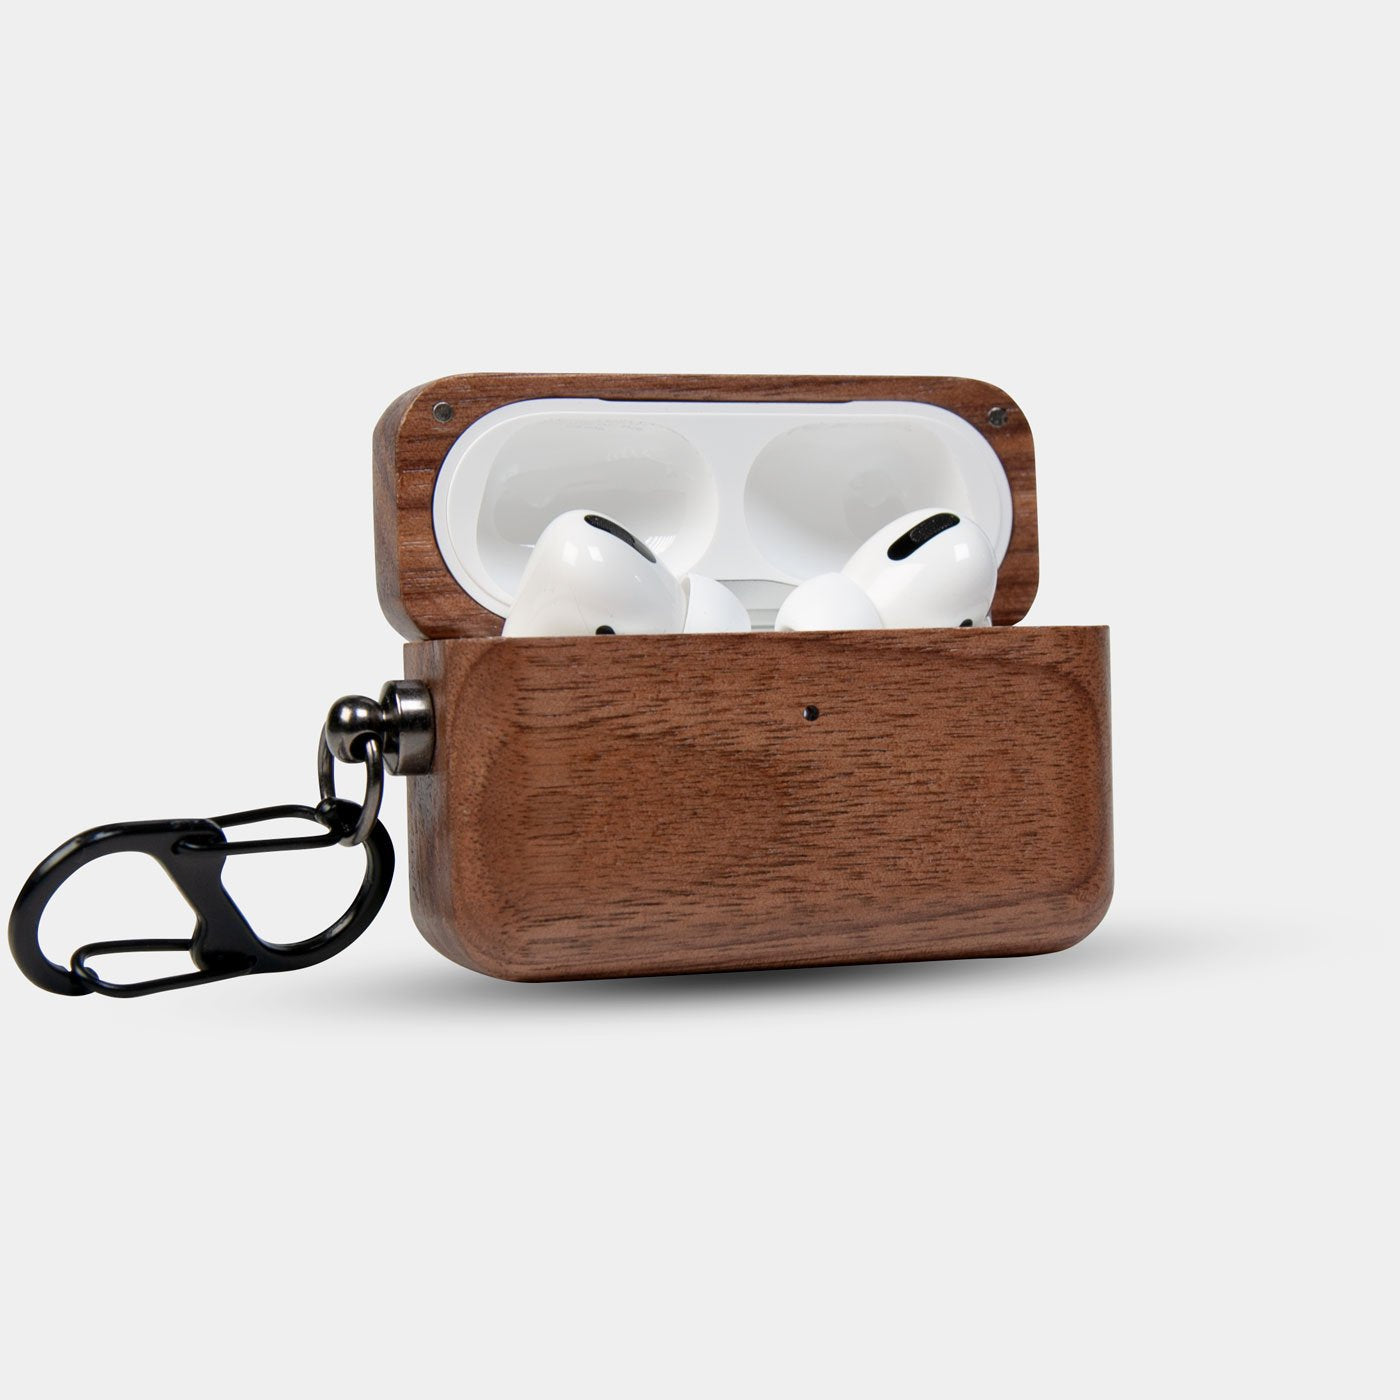 Custom Chelsea F.C. AirPods Cases | AirPods | AirPods Pro - Carved Wood Chelsea FC AirPods Cover